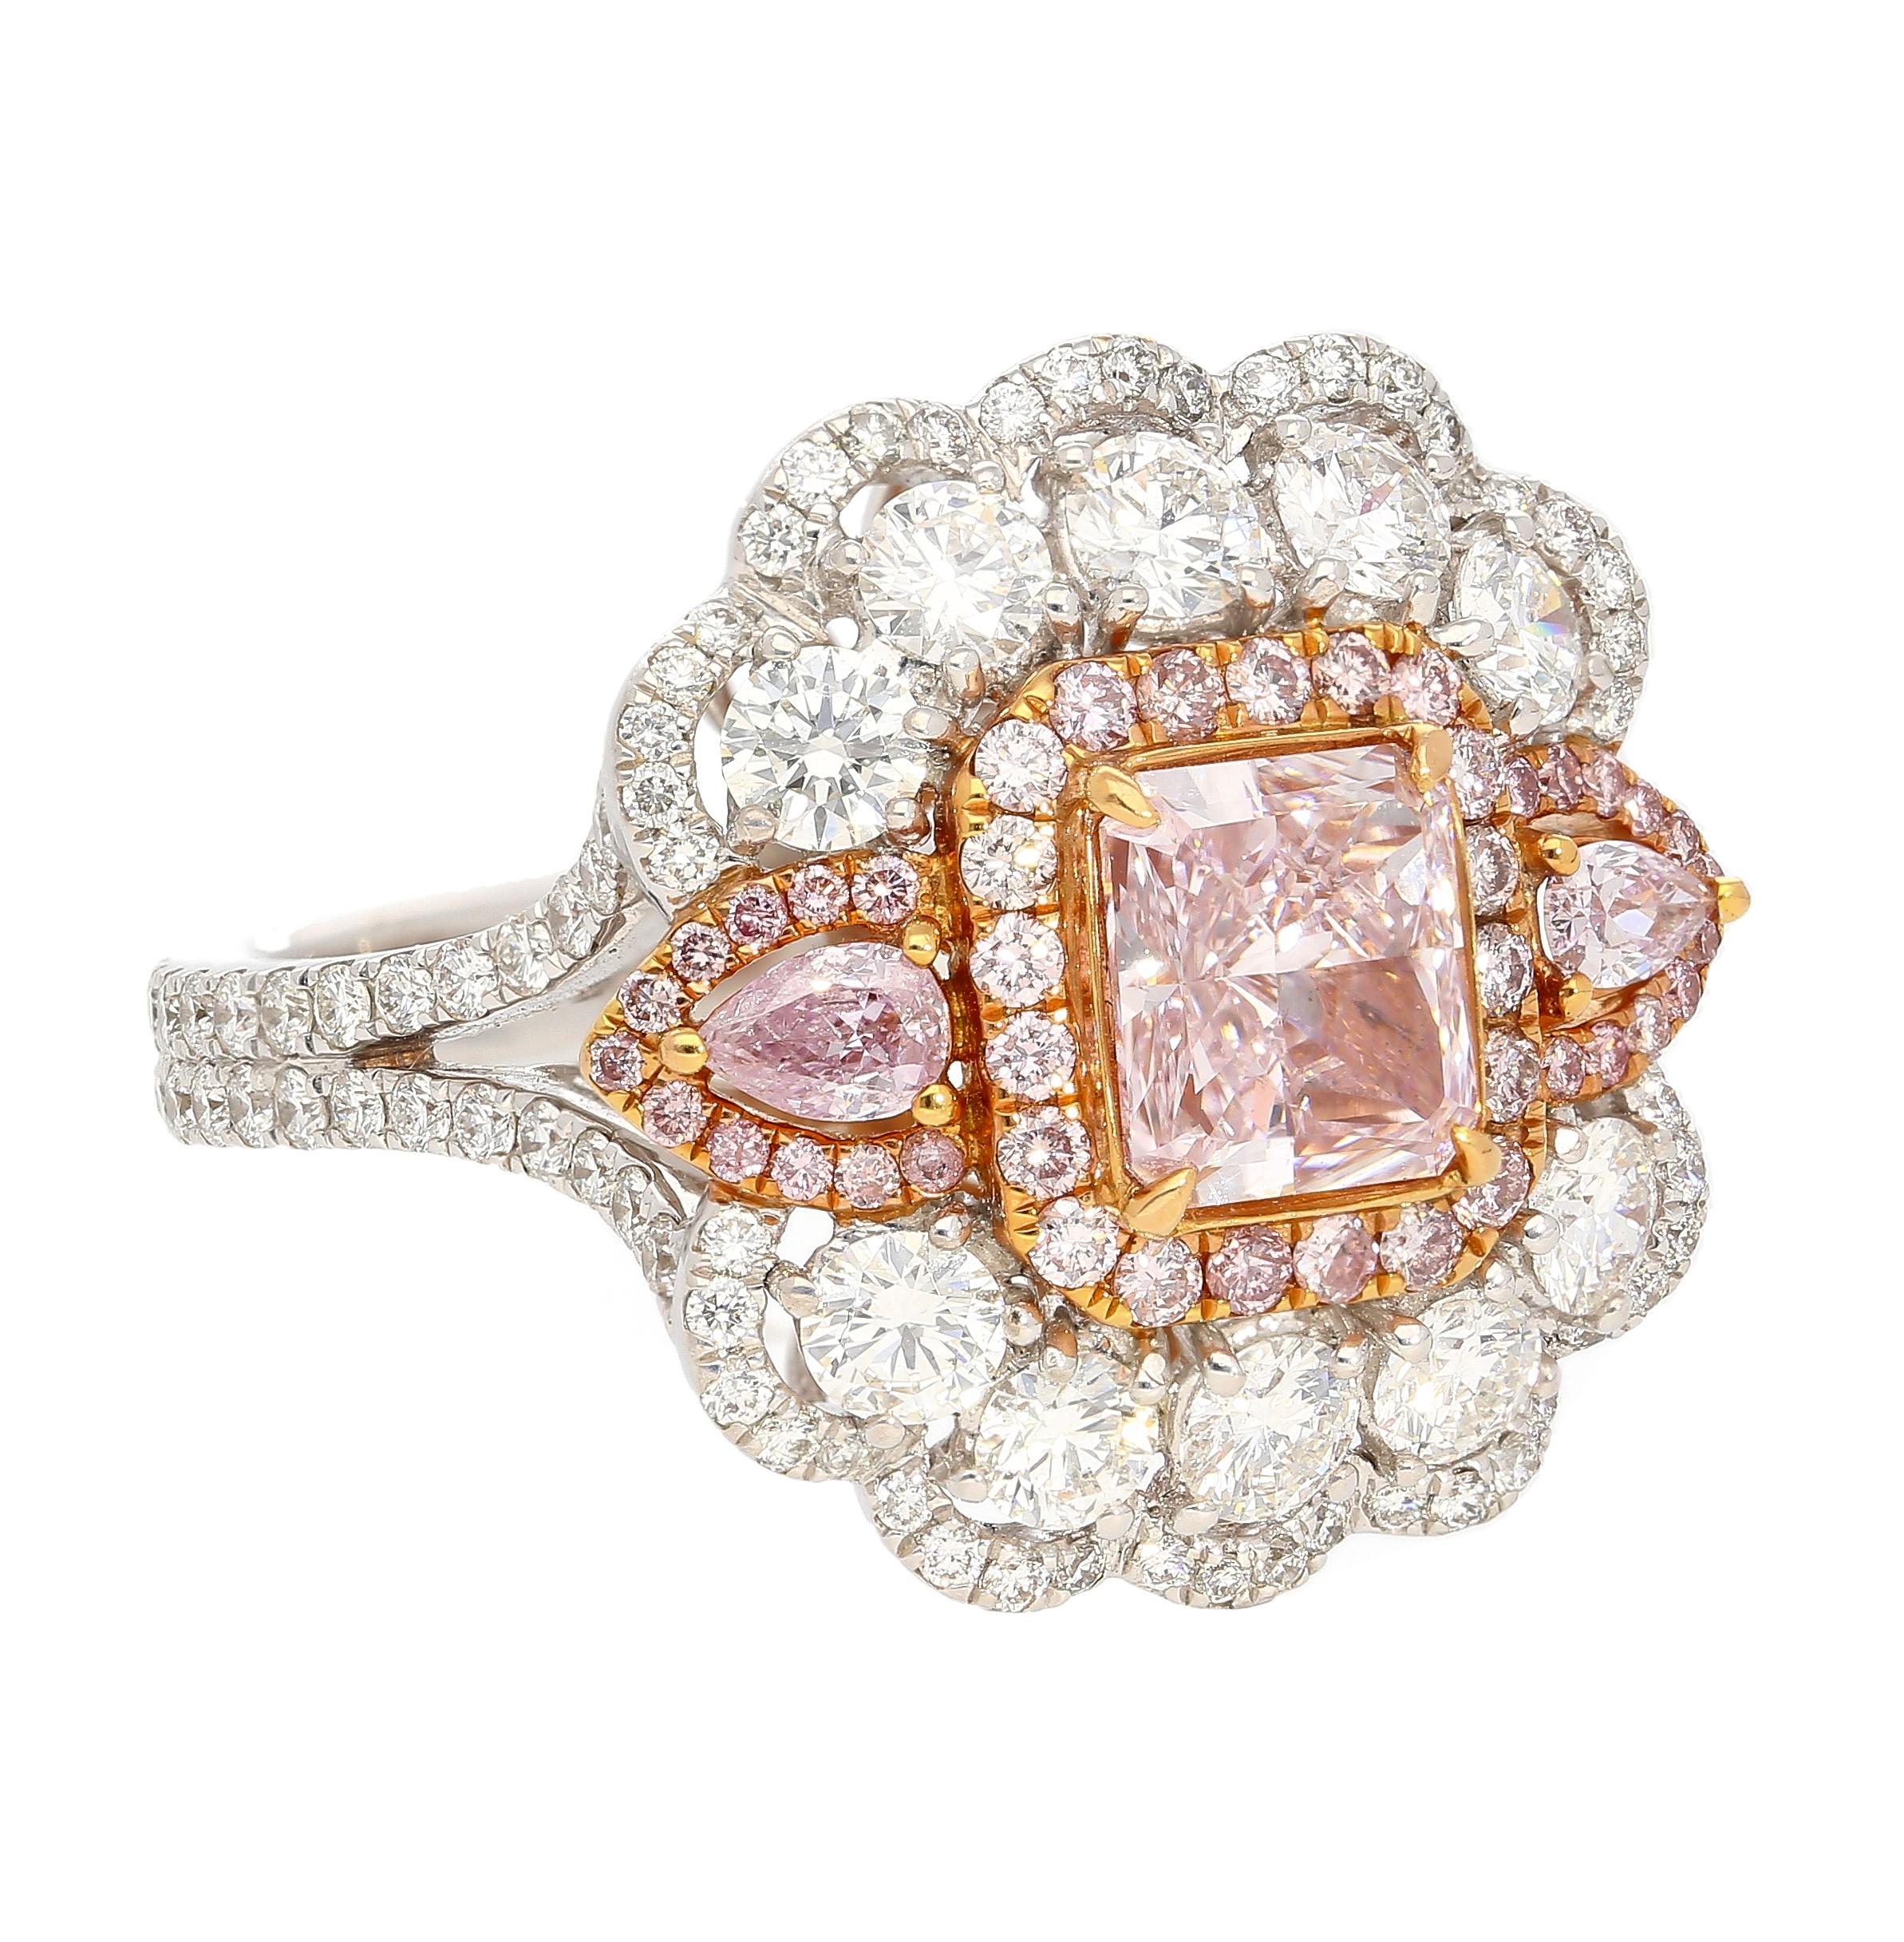 GIA Certified 1.07 Carat Fancy Light Purplish Pink Radiant Cut Diamond Ring in 18k white and rose gold. Showcasing a combination of 18k solid white gold on the shank and rose gold thoughtfully placed wherever the pink diamonds are set for the